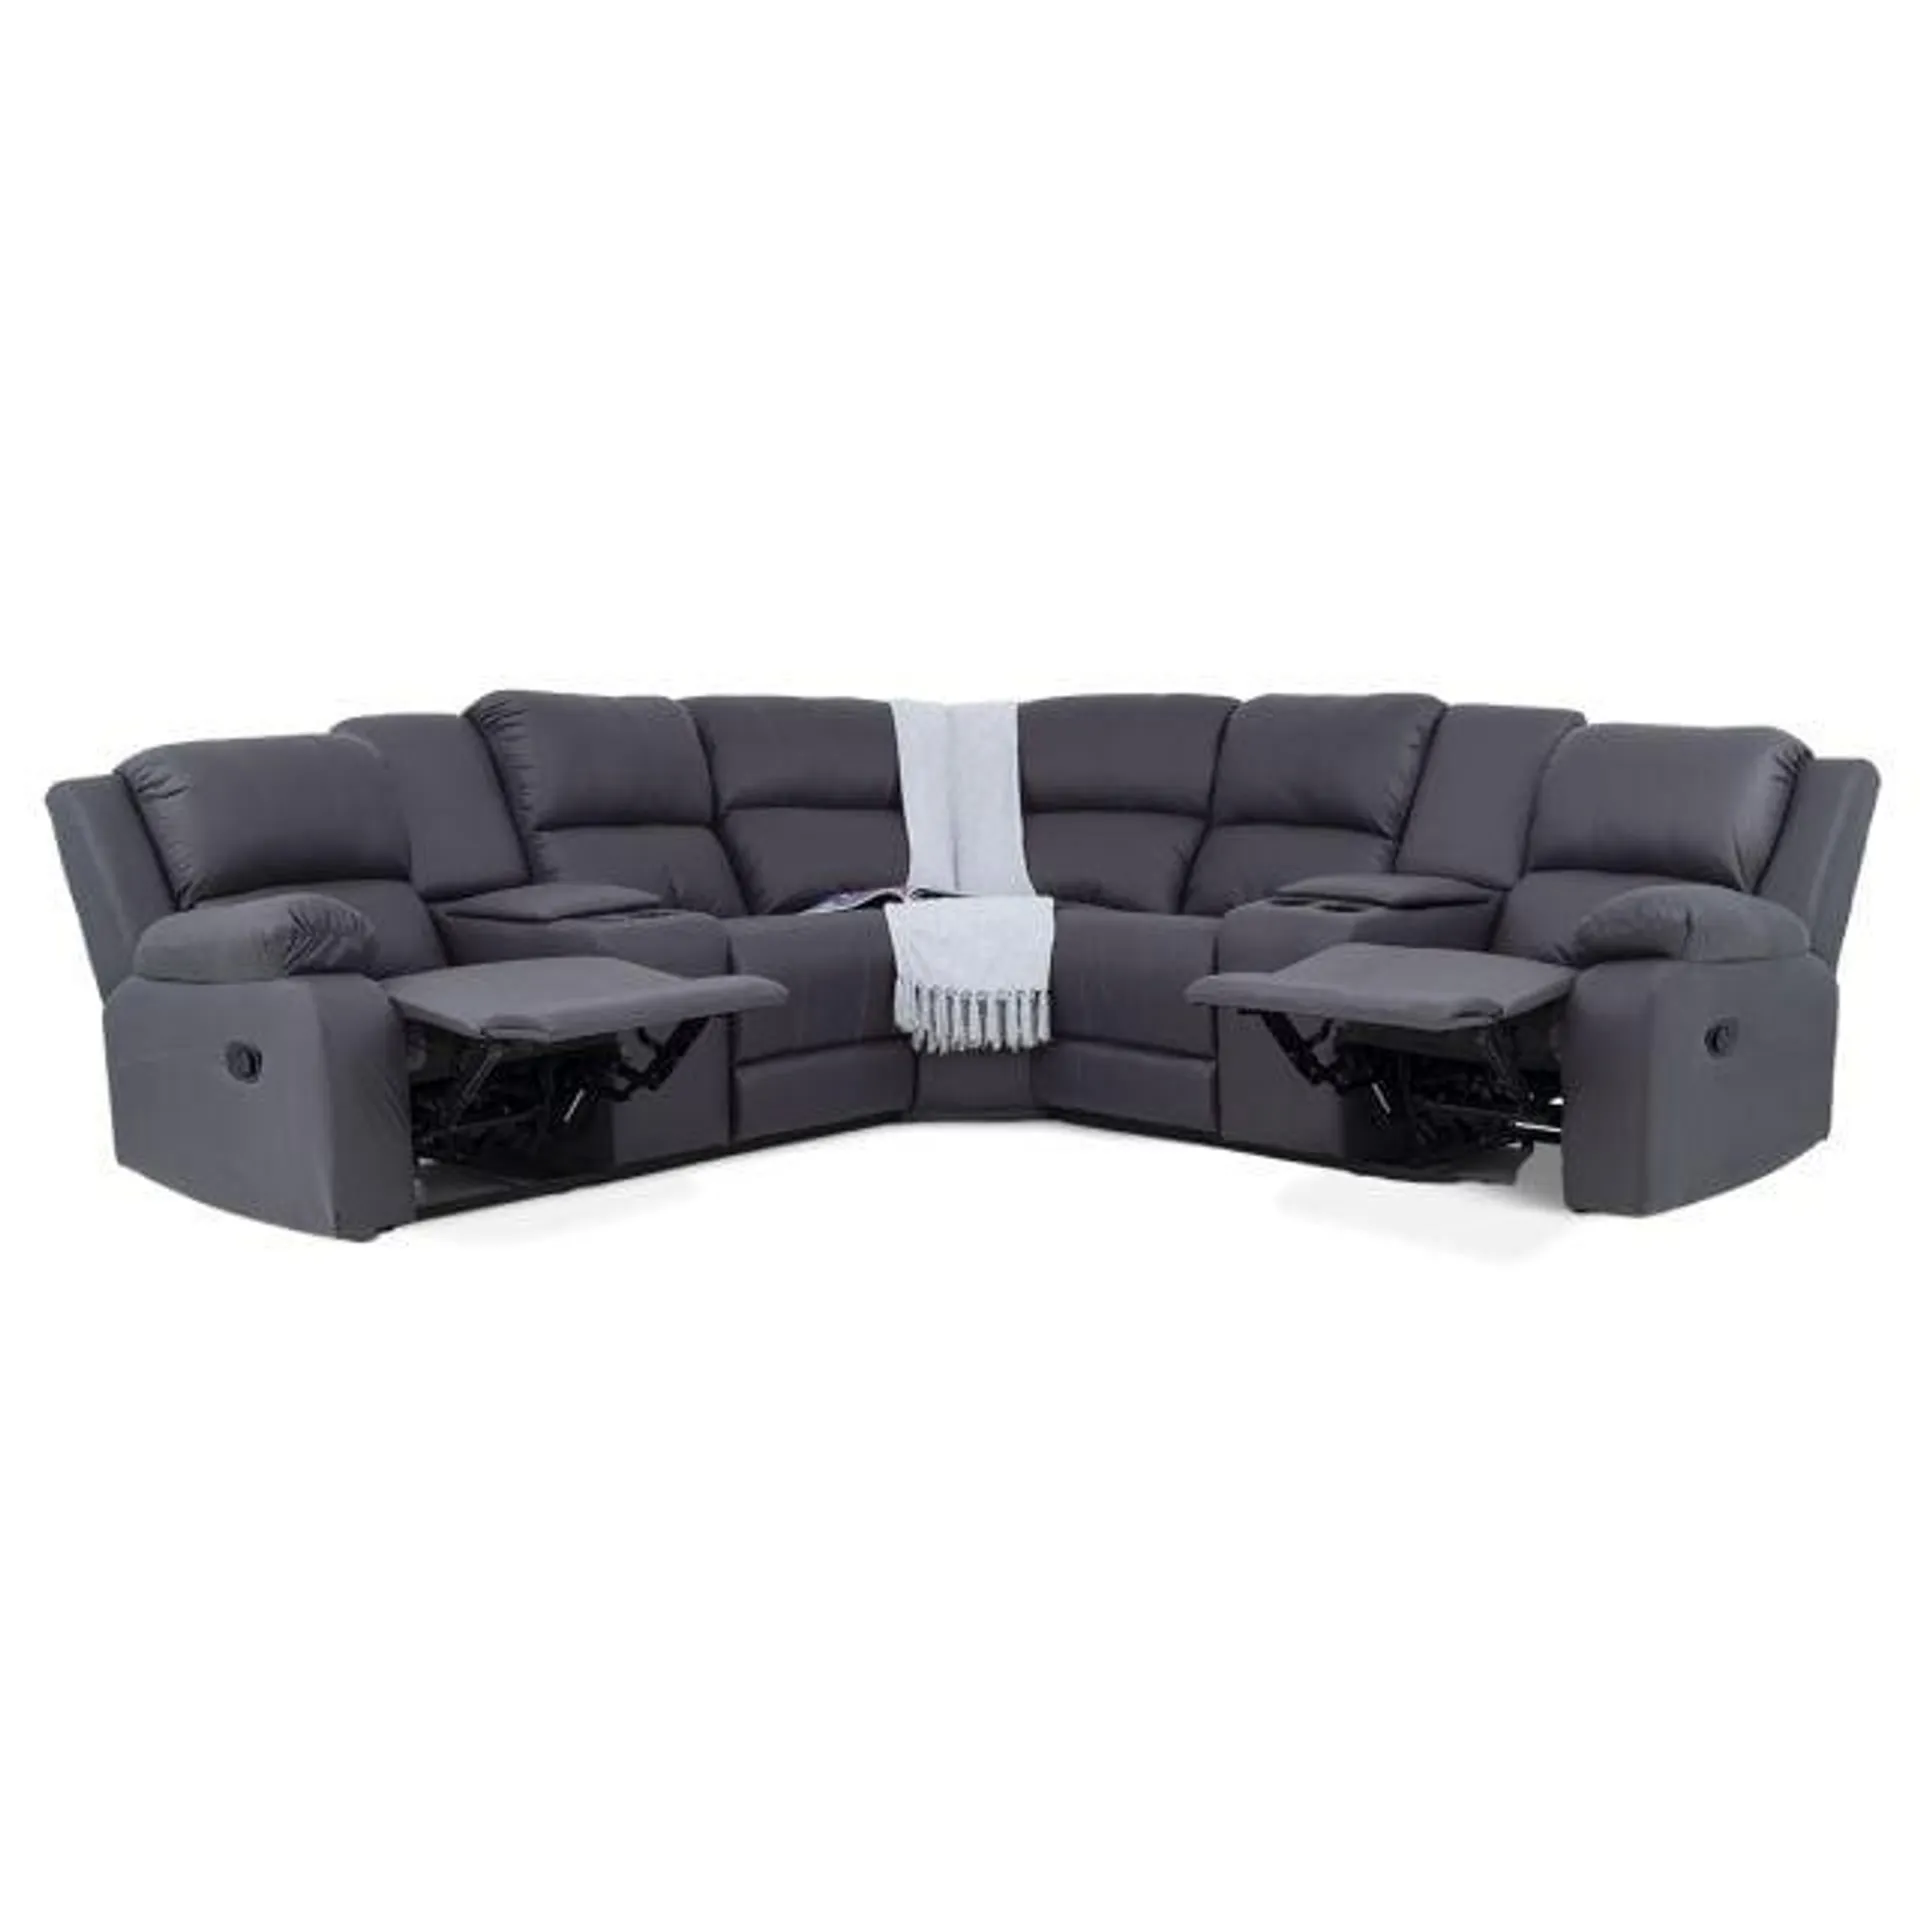 Jody Corner Lounge Suite with Recliners